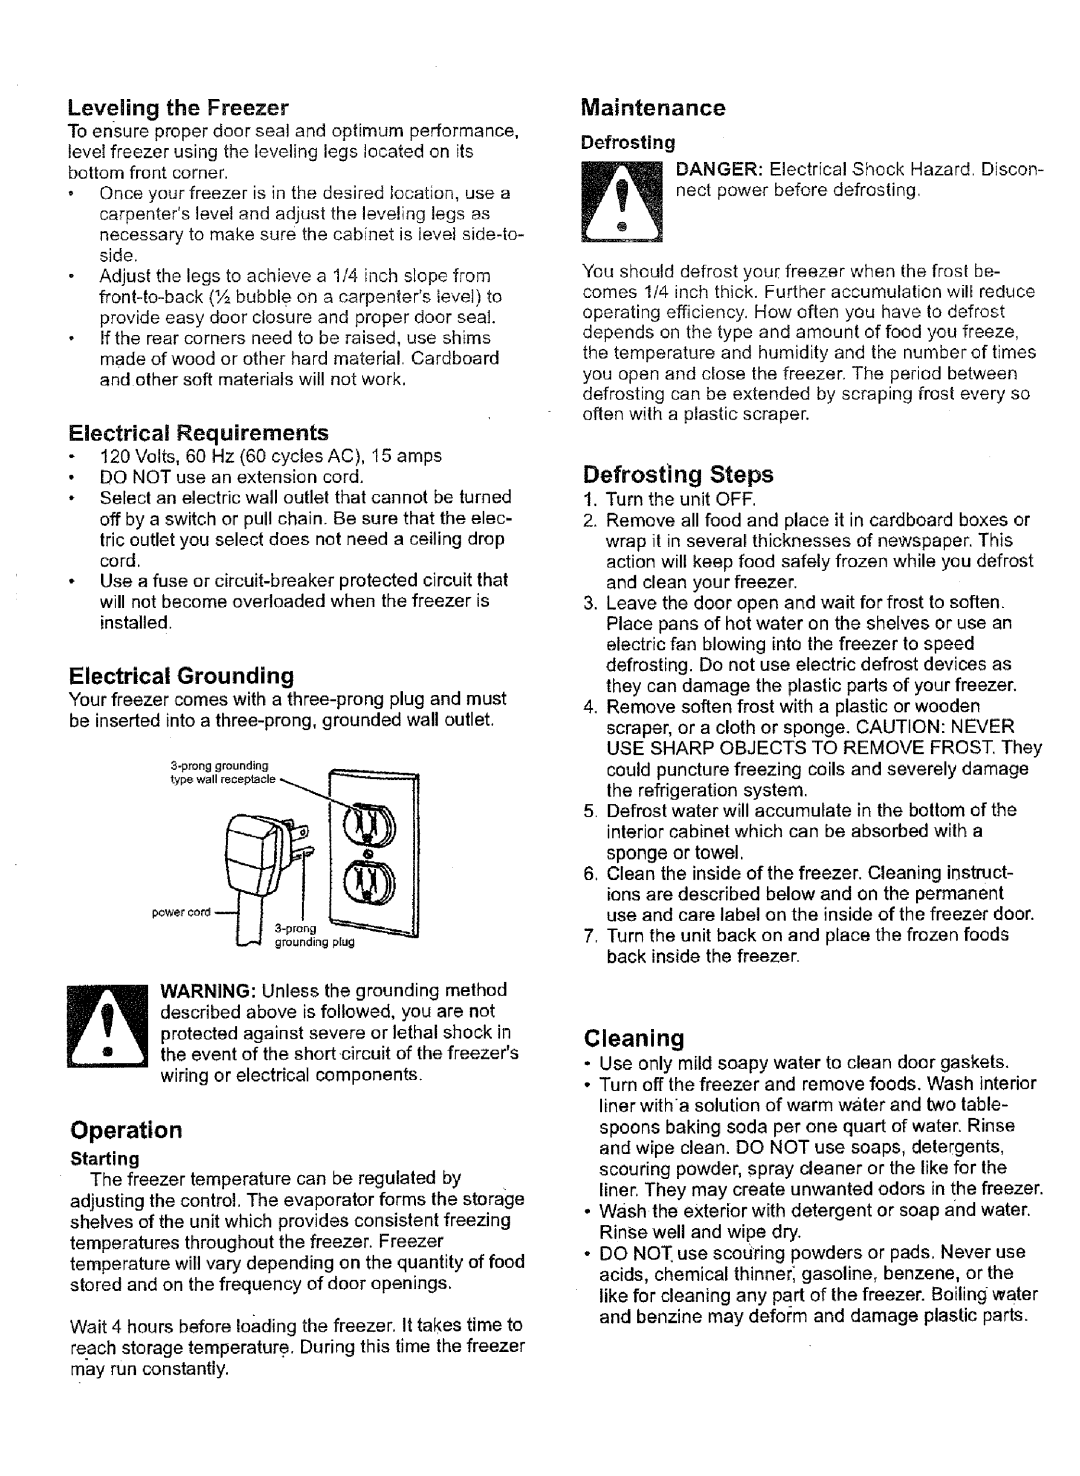 Kenmore 28502 warranty Operation, Electrical Grounding, Defrosting Steps, Leveling the Freezer, Electrical Requirements 